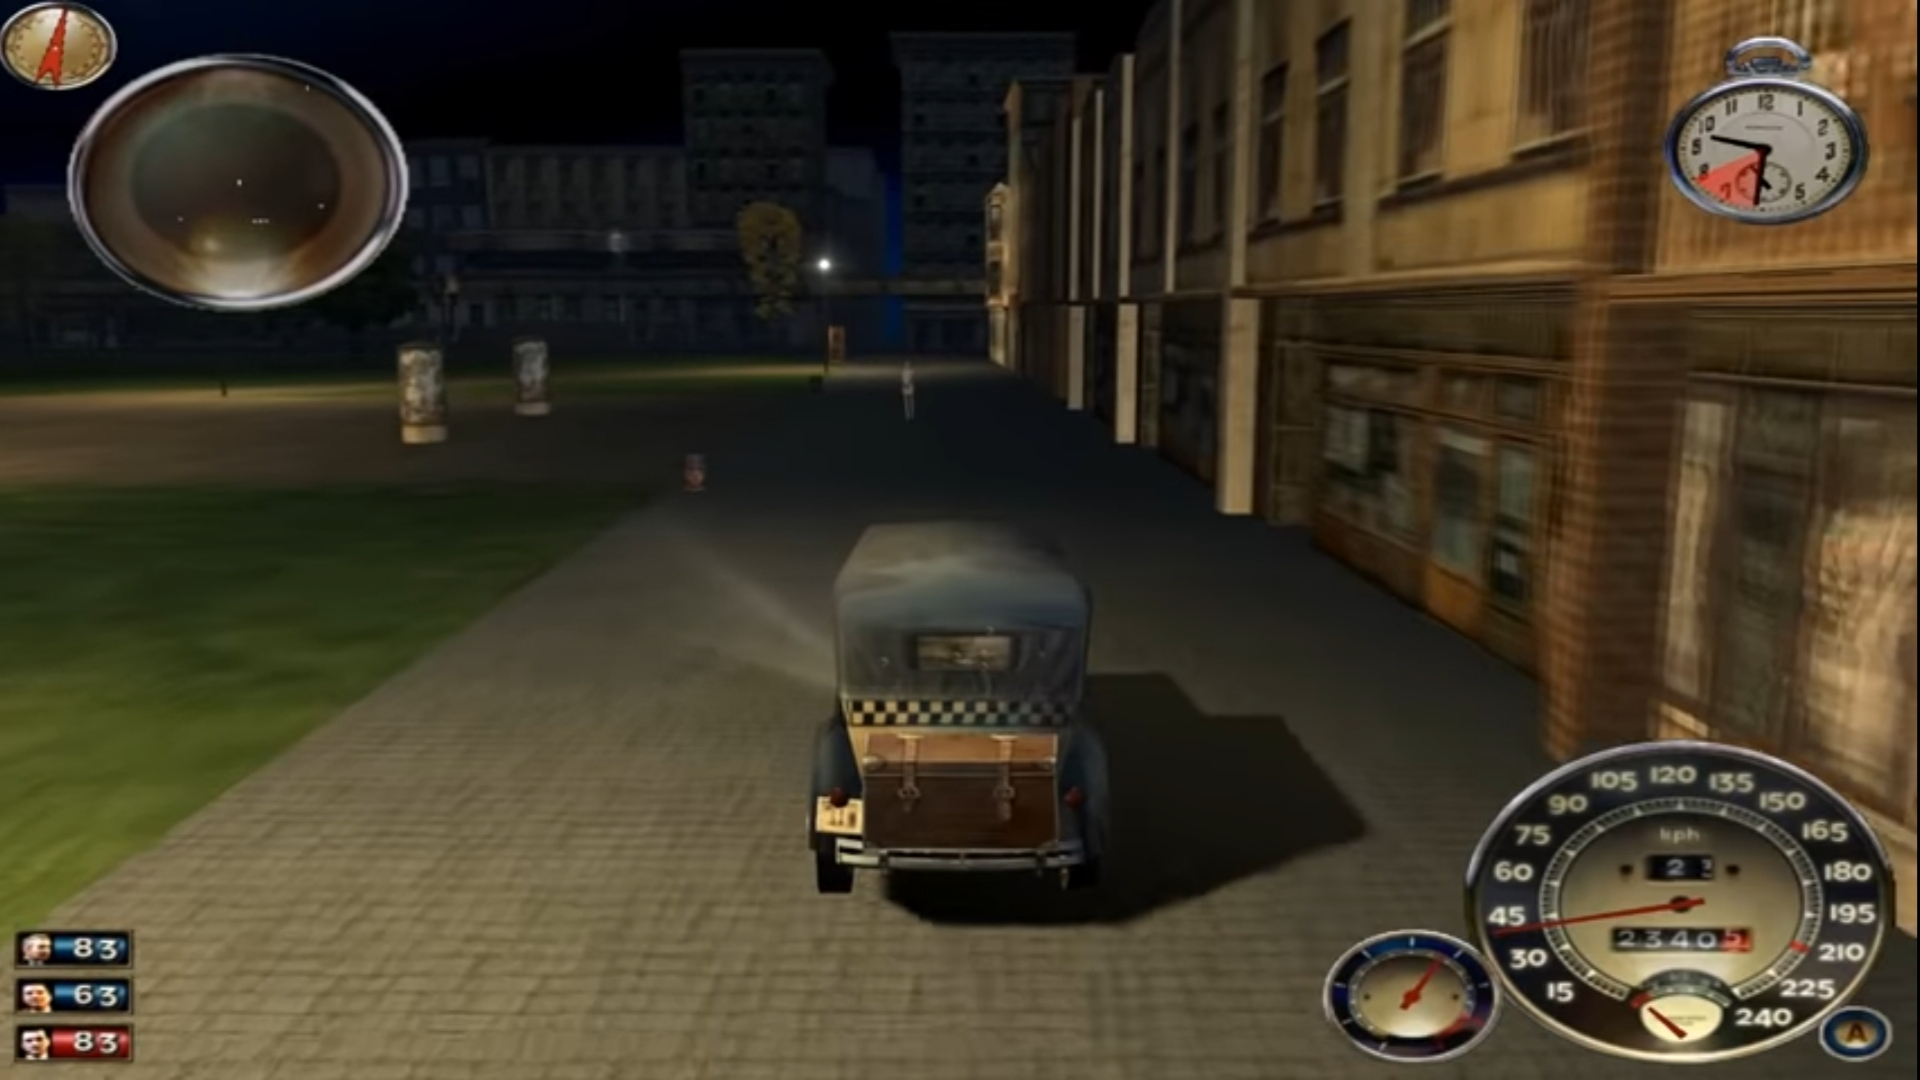 free download mafia 1 pc game highly compressed